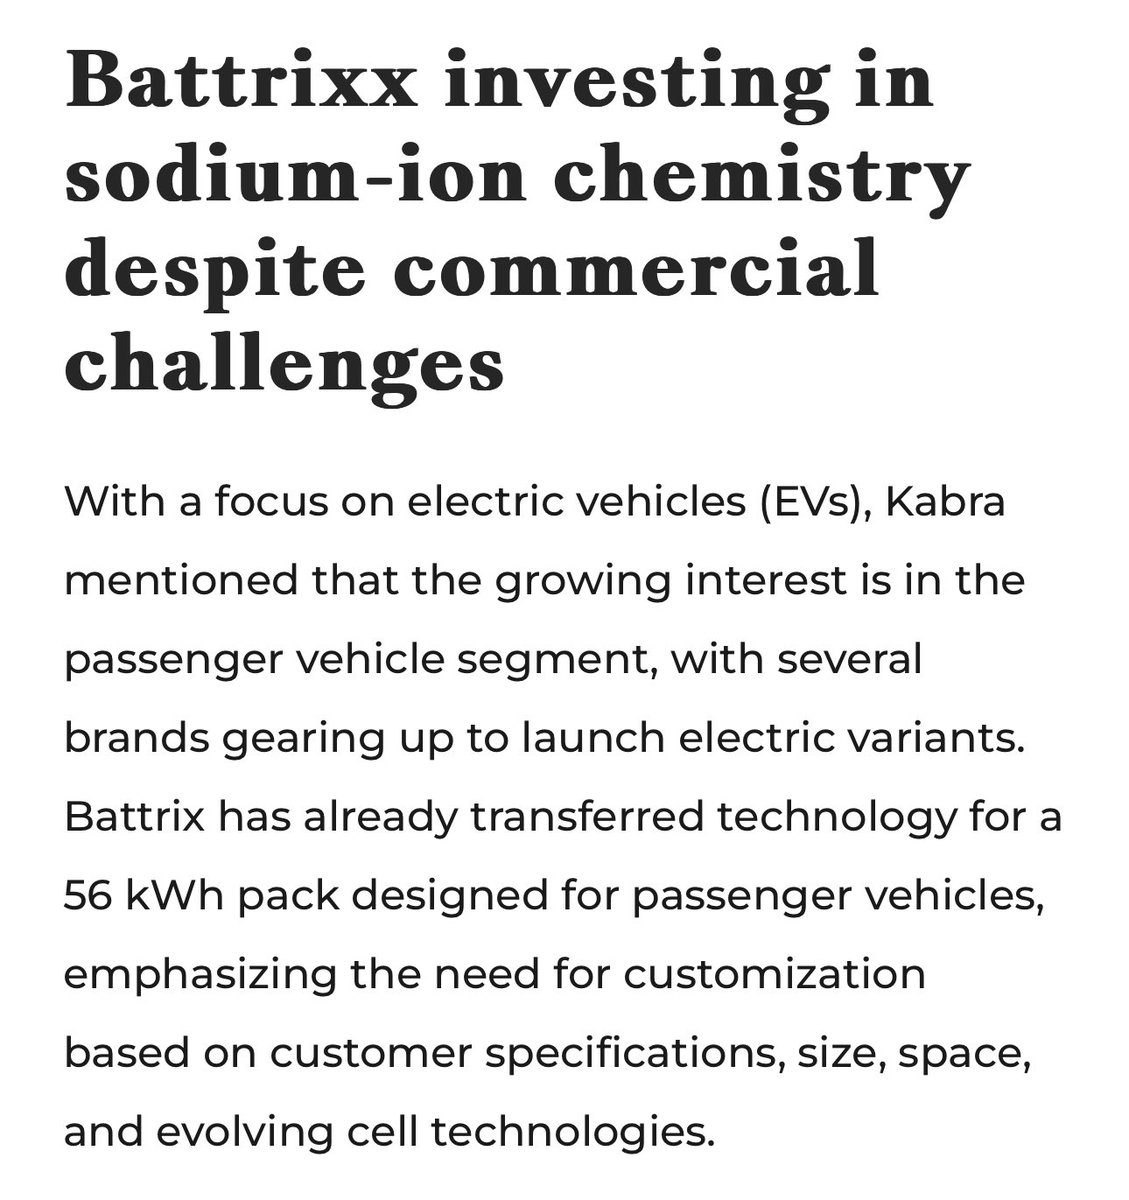 Battrixx, a subsidiary of #KabraExtrusion, is investing into R&D of Sodium Ion batteries. Battrixx, already has a wide portfolio of Li-ion batteries with NMC, LFP, NCA, and LMFP chemistries for 2W, 3W(auto/cargo vehicles), battery management system (BMS) and IoT.
#batteries #EV